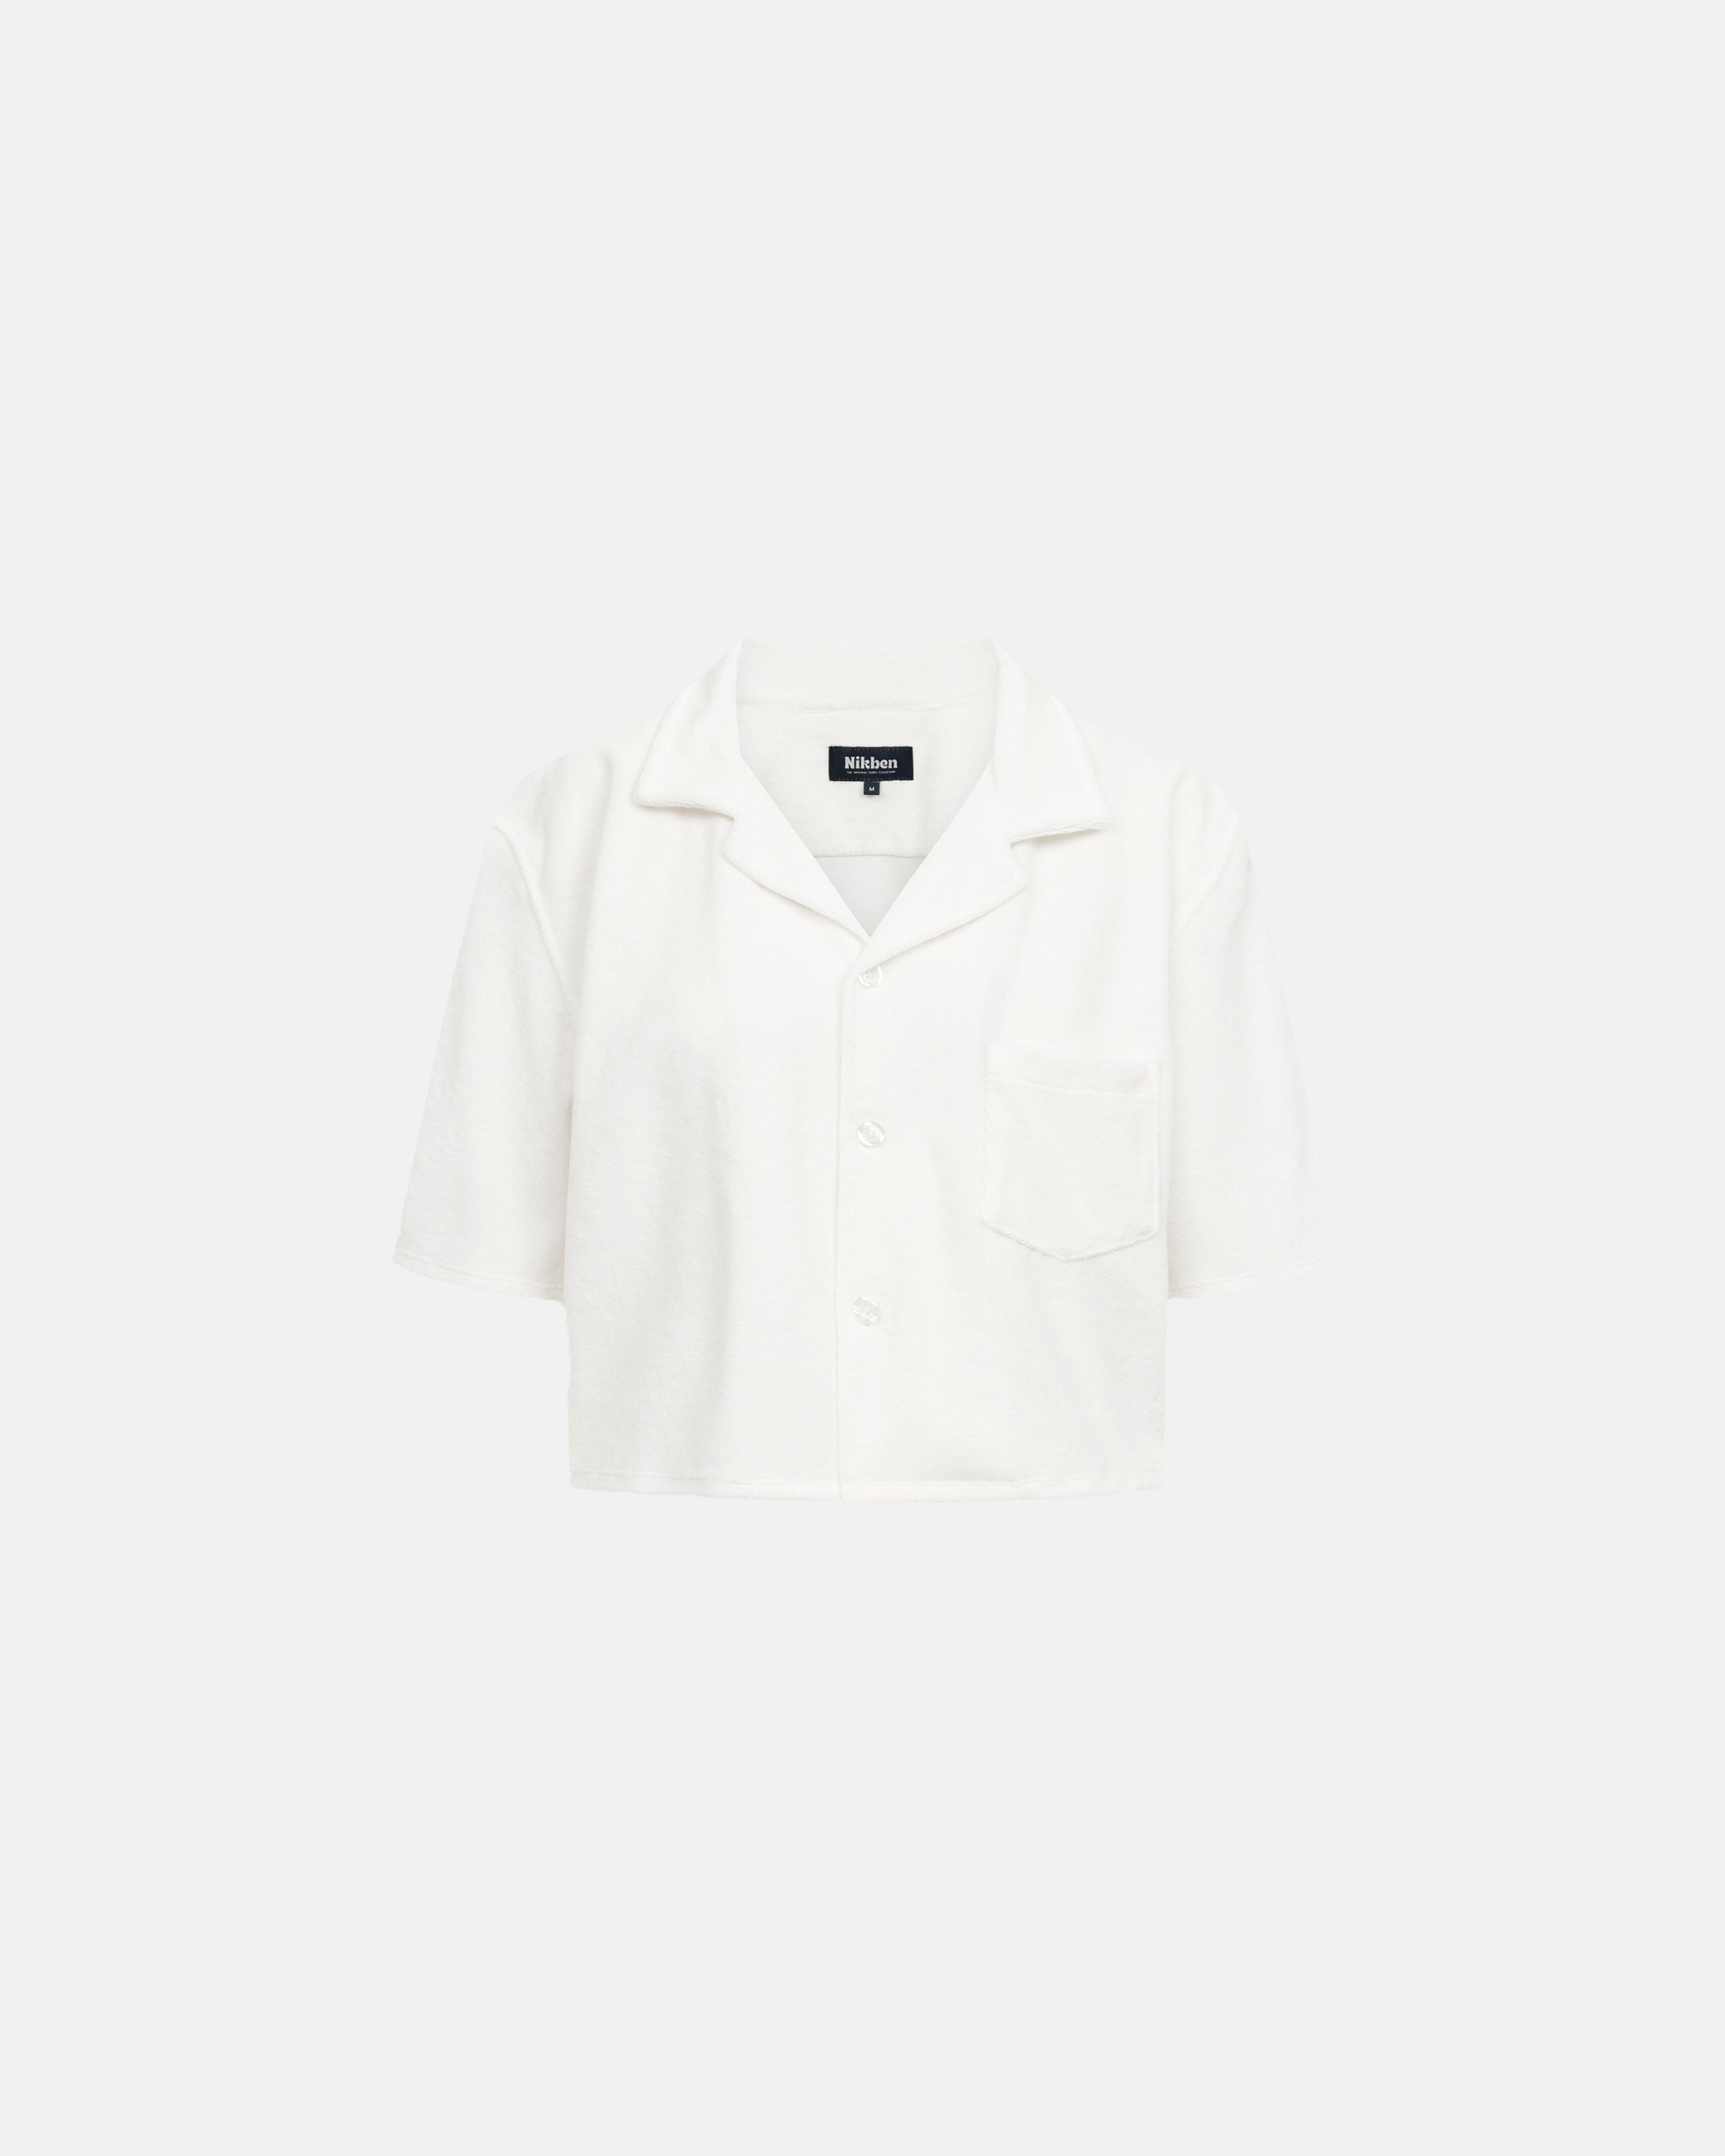 White, short sleeve, cropped shirt with white button closure and one chest pocket